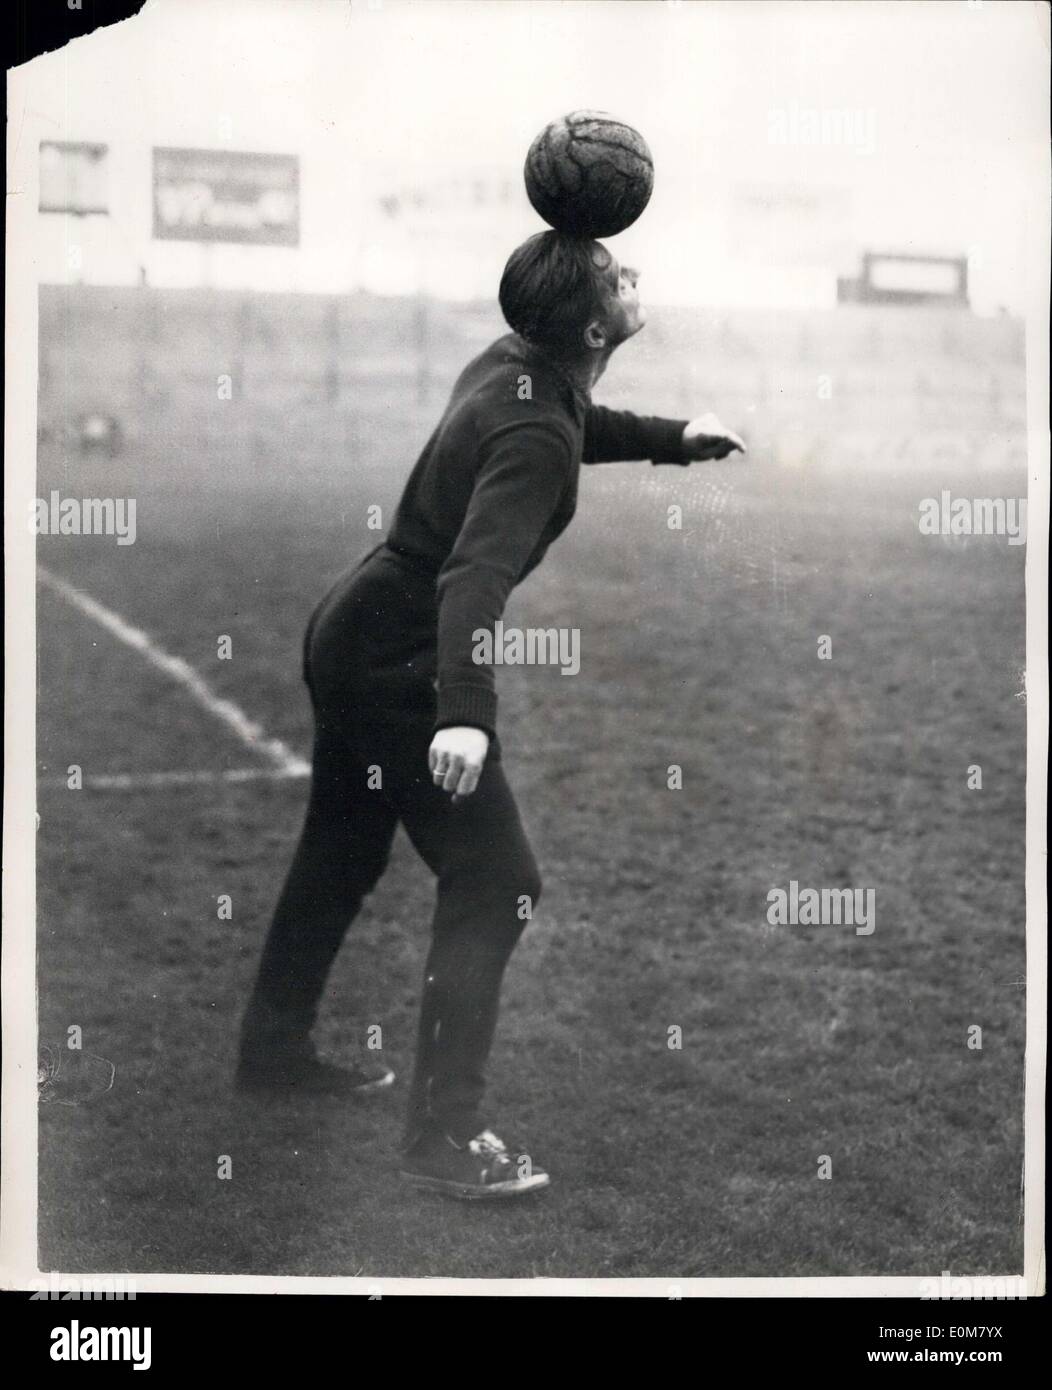 Nov. 24, 1953 - Hungarian Footballers IN Training.. Lorant Does A Balancing Act.. Members of the Hungarian Football Team which meets England at Wembley tomorrow were to be seen training at the Fulham Ground this morning. Photo shows Lorent of the Hungarian Team seen balancing a ball on his head - during training this morning. Stock Photo